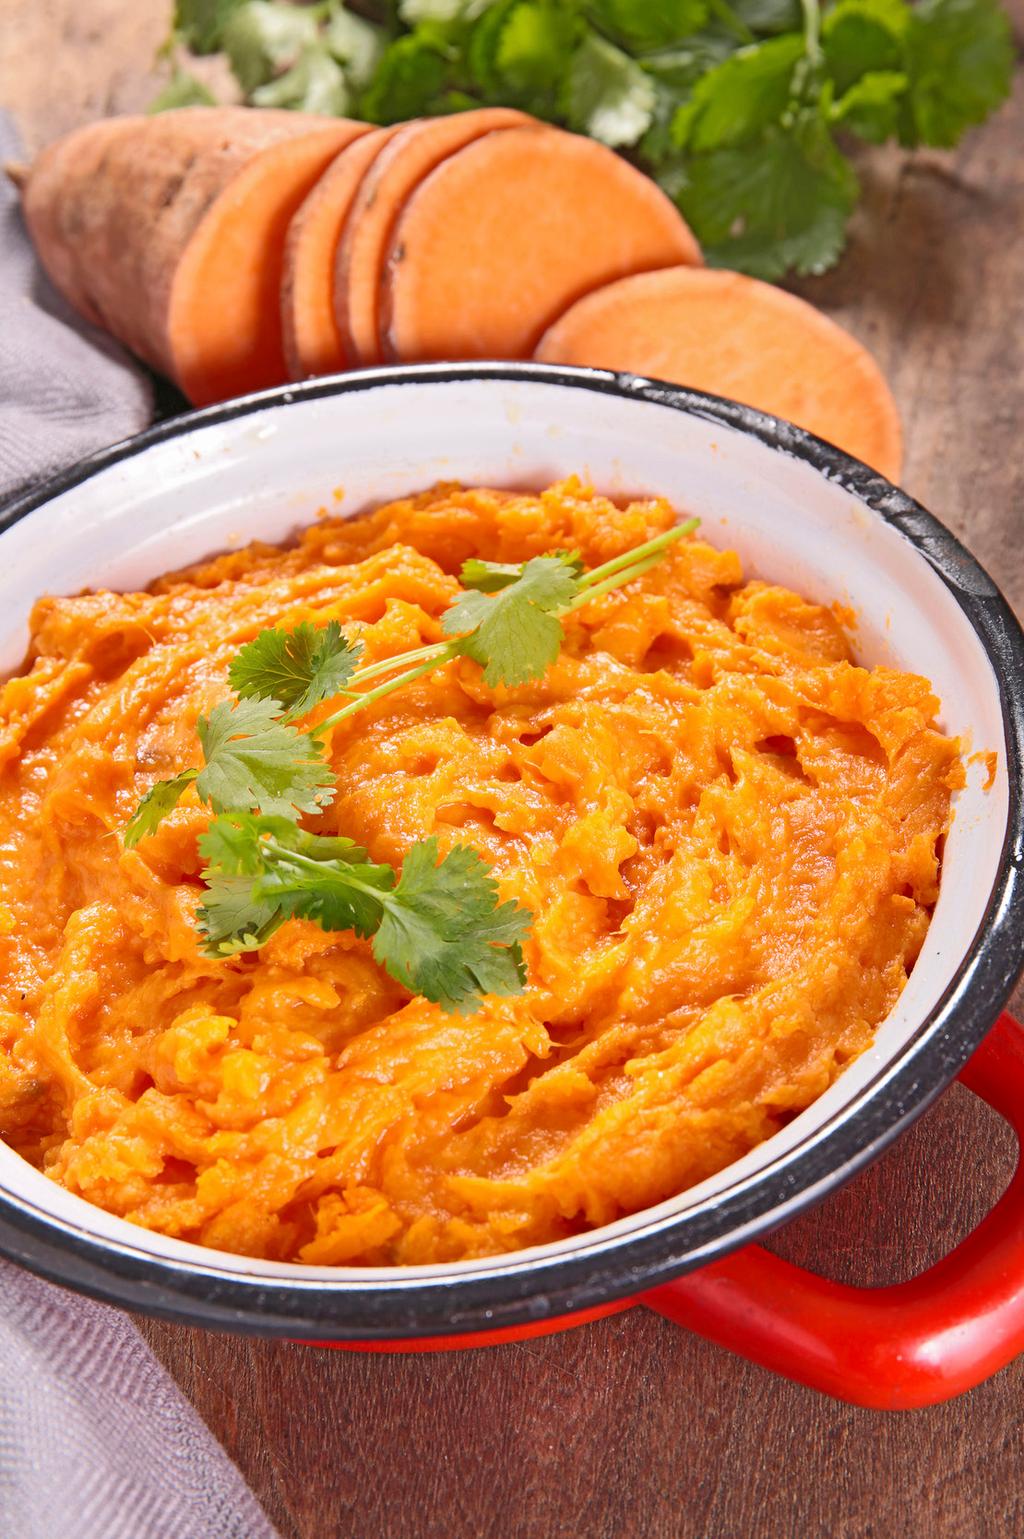 Recipe of the Month: Parsnip Sweet Potato Mash Ingredients: 2 sweet potatoes, peeled ¼ tsp kosher salt 1 ½ cups parsnips, peeled and diced ¼ tsp pepper 1 tbsp parsley (chopped) Pinch of nutmeg ¼ cup